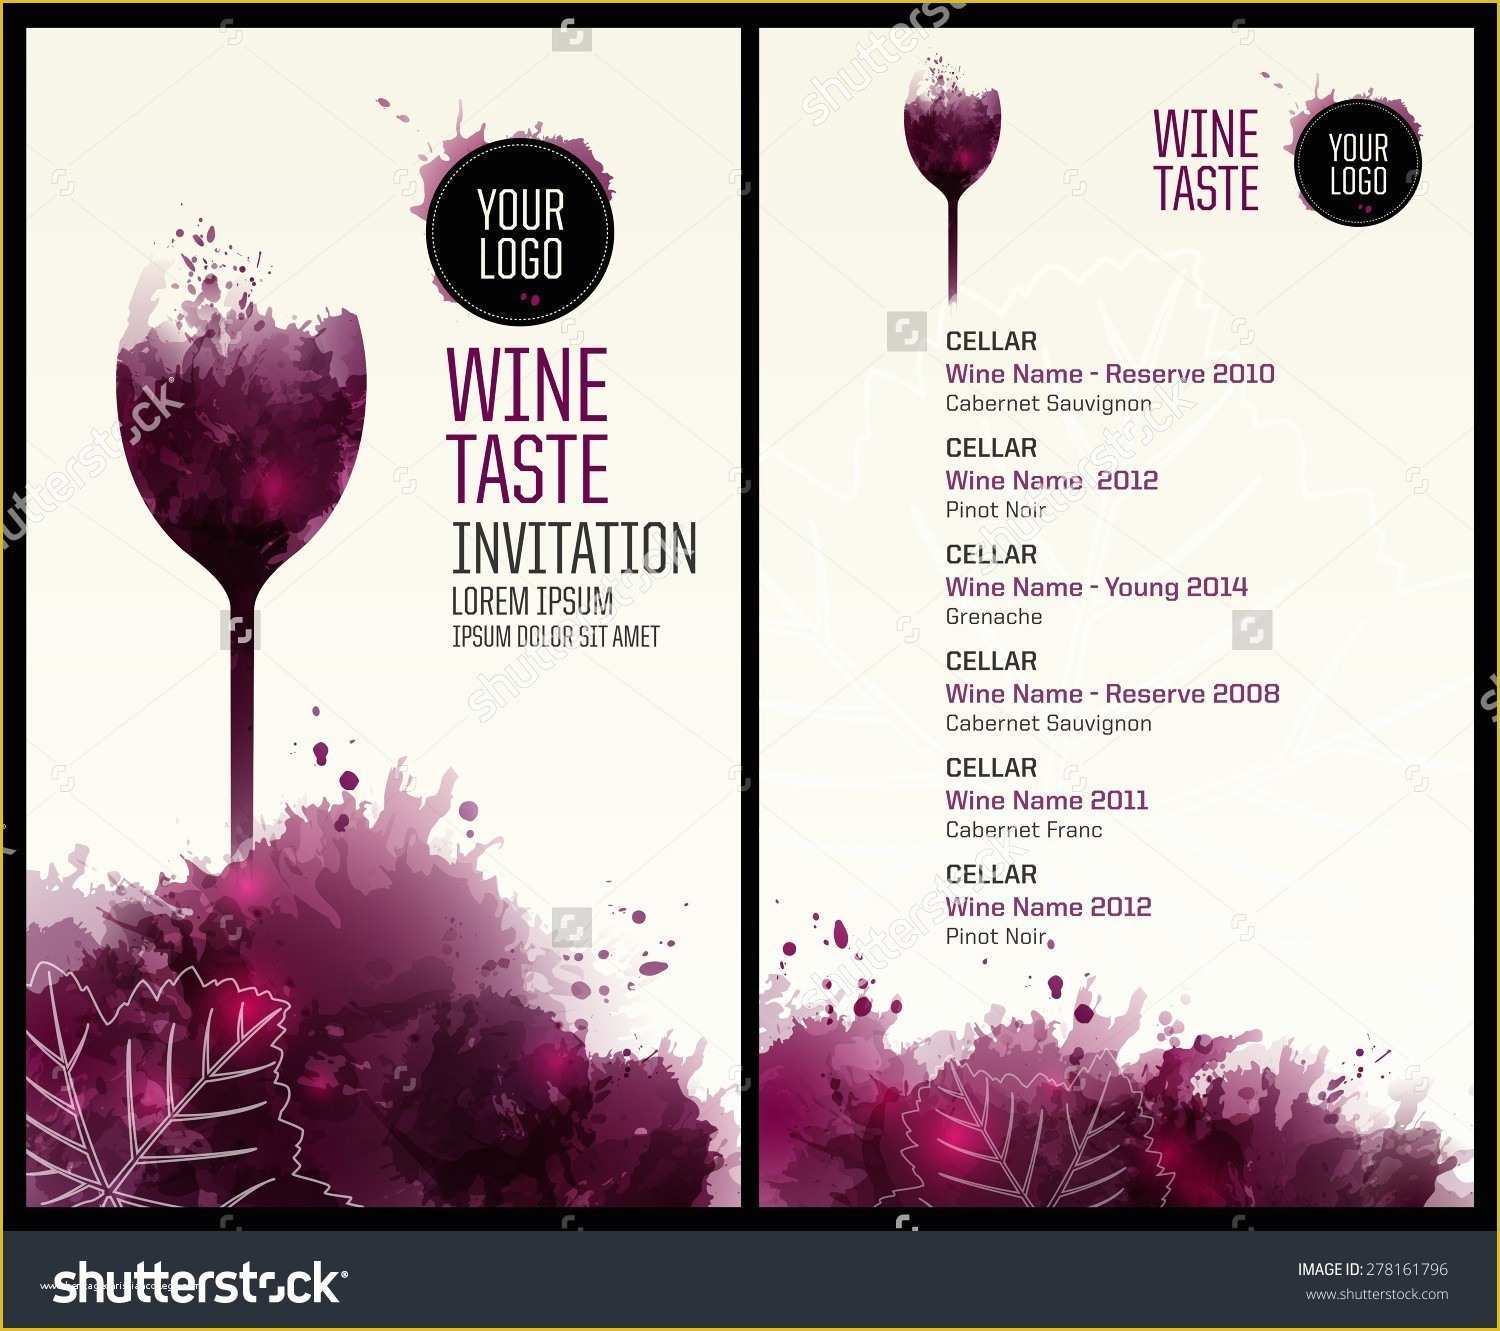 Wine Tasting Invitation Template Free Of Best Invitation Wording for Wine Party